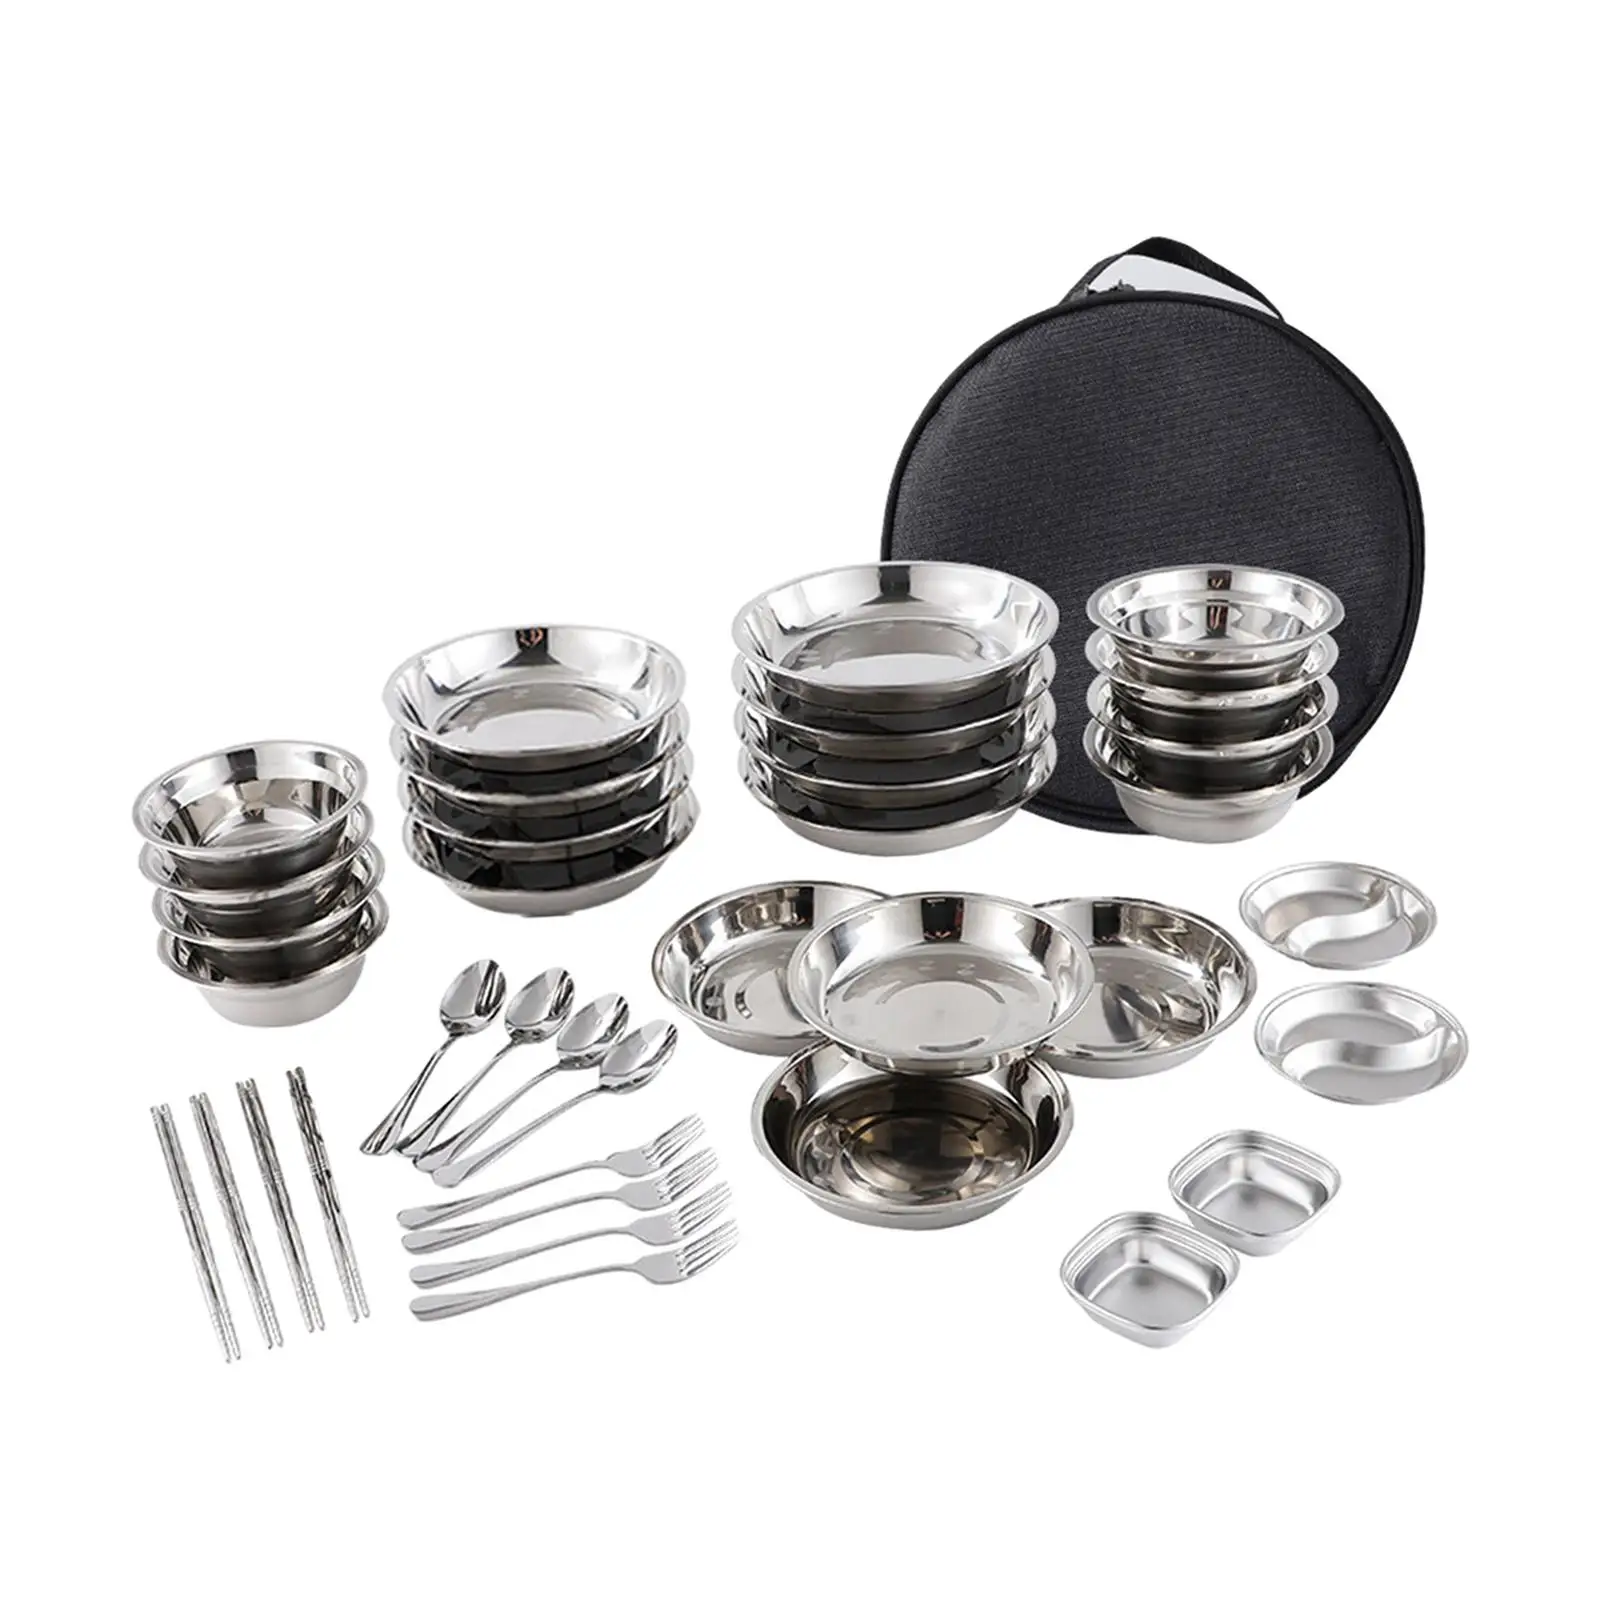 Stainless Steel Plates and Bowls Camping Set Camping Cutlery Set Tableware